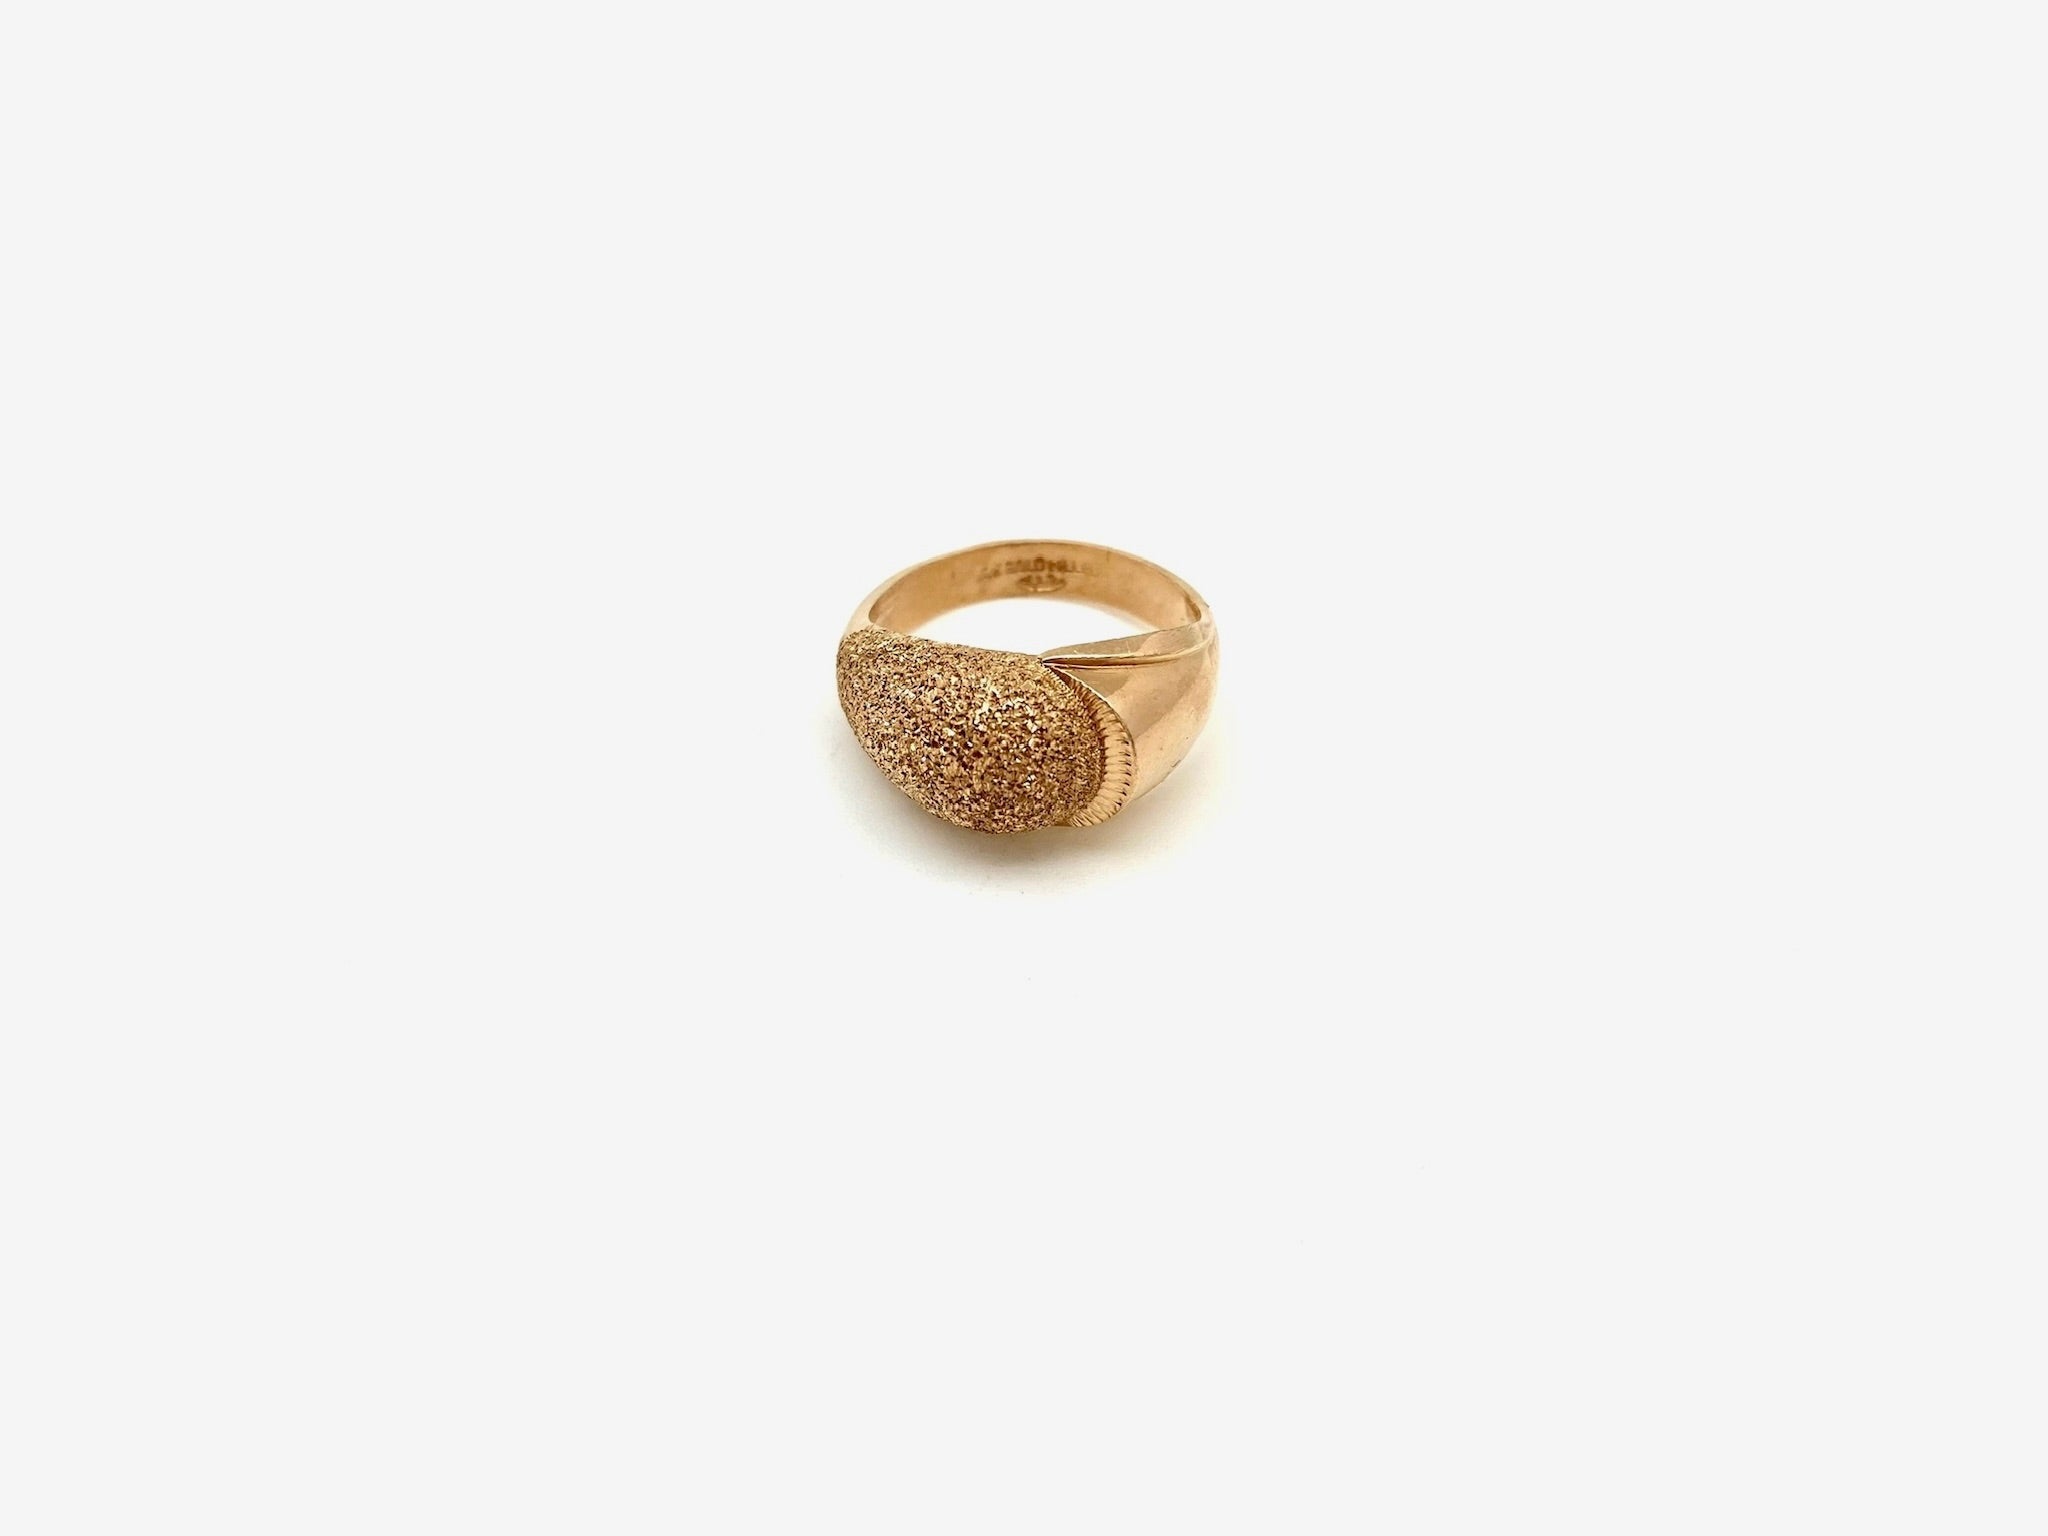 Sun-down Vintage Dome Ring - Stone Cooper